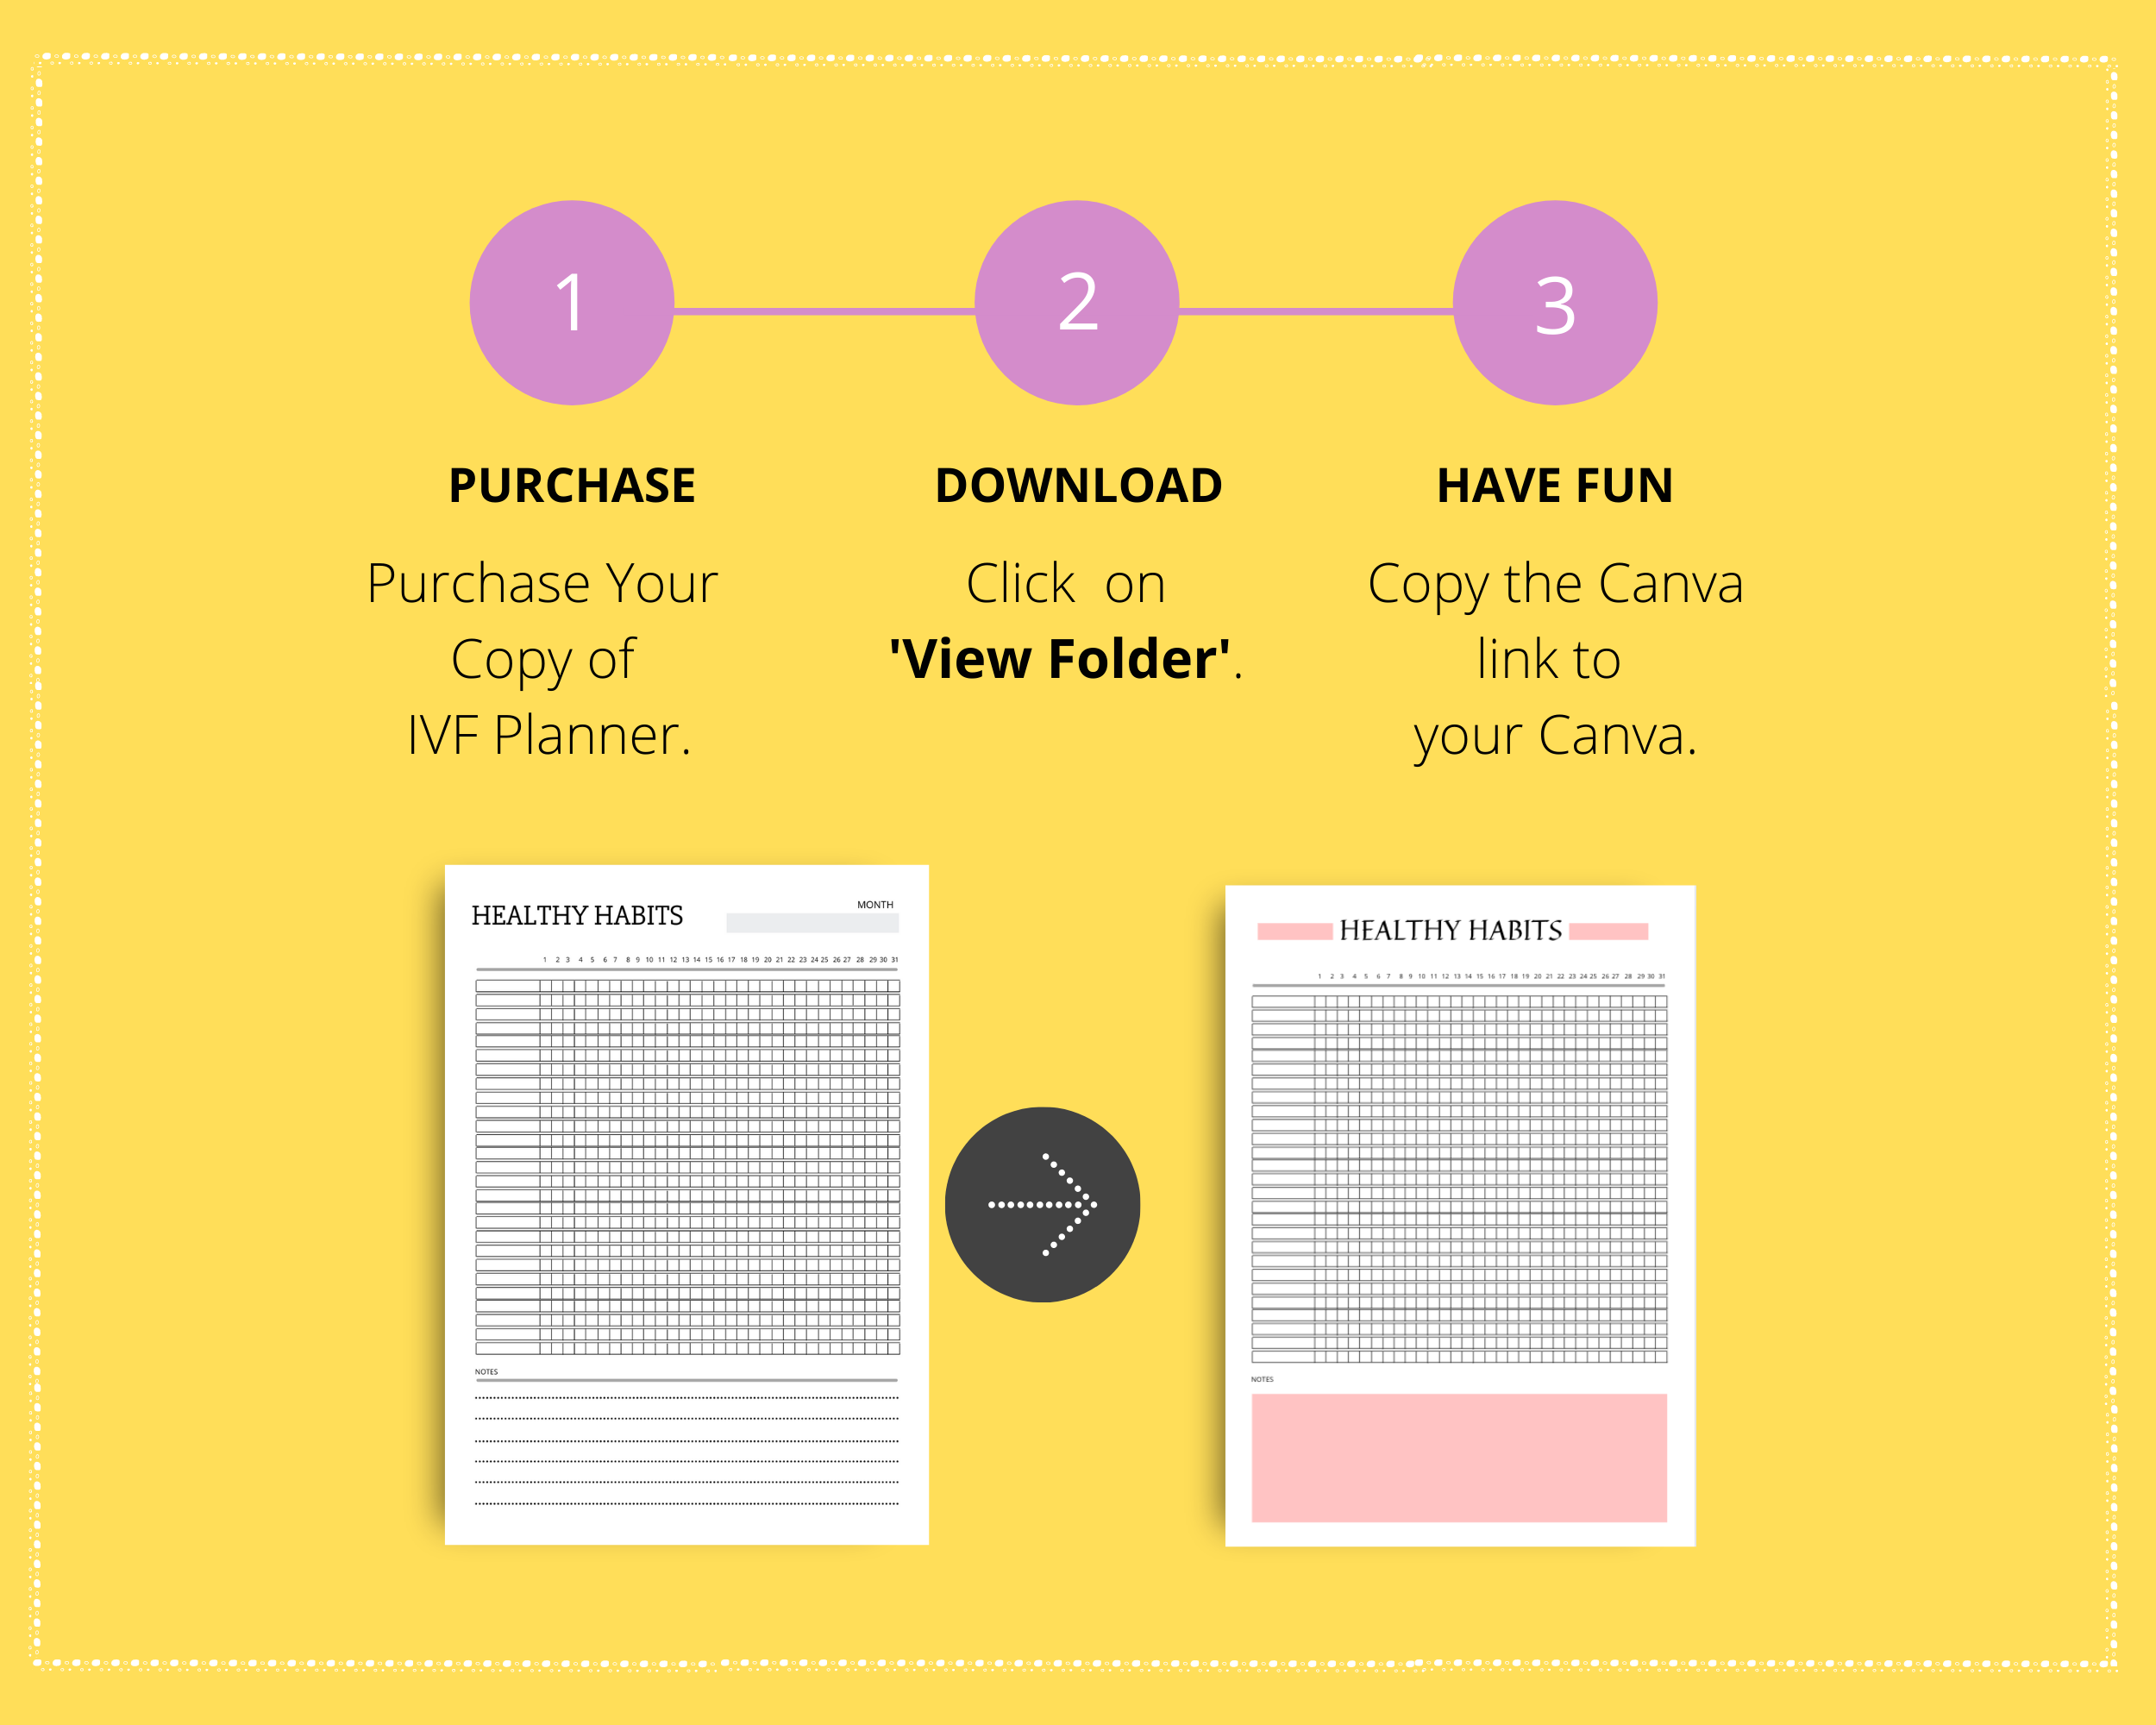 Editable IVF Planner Templates in Canva | Commercial Use